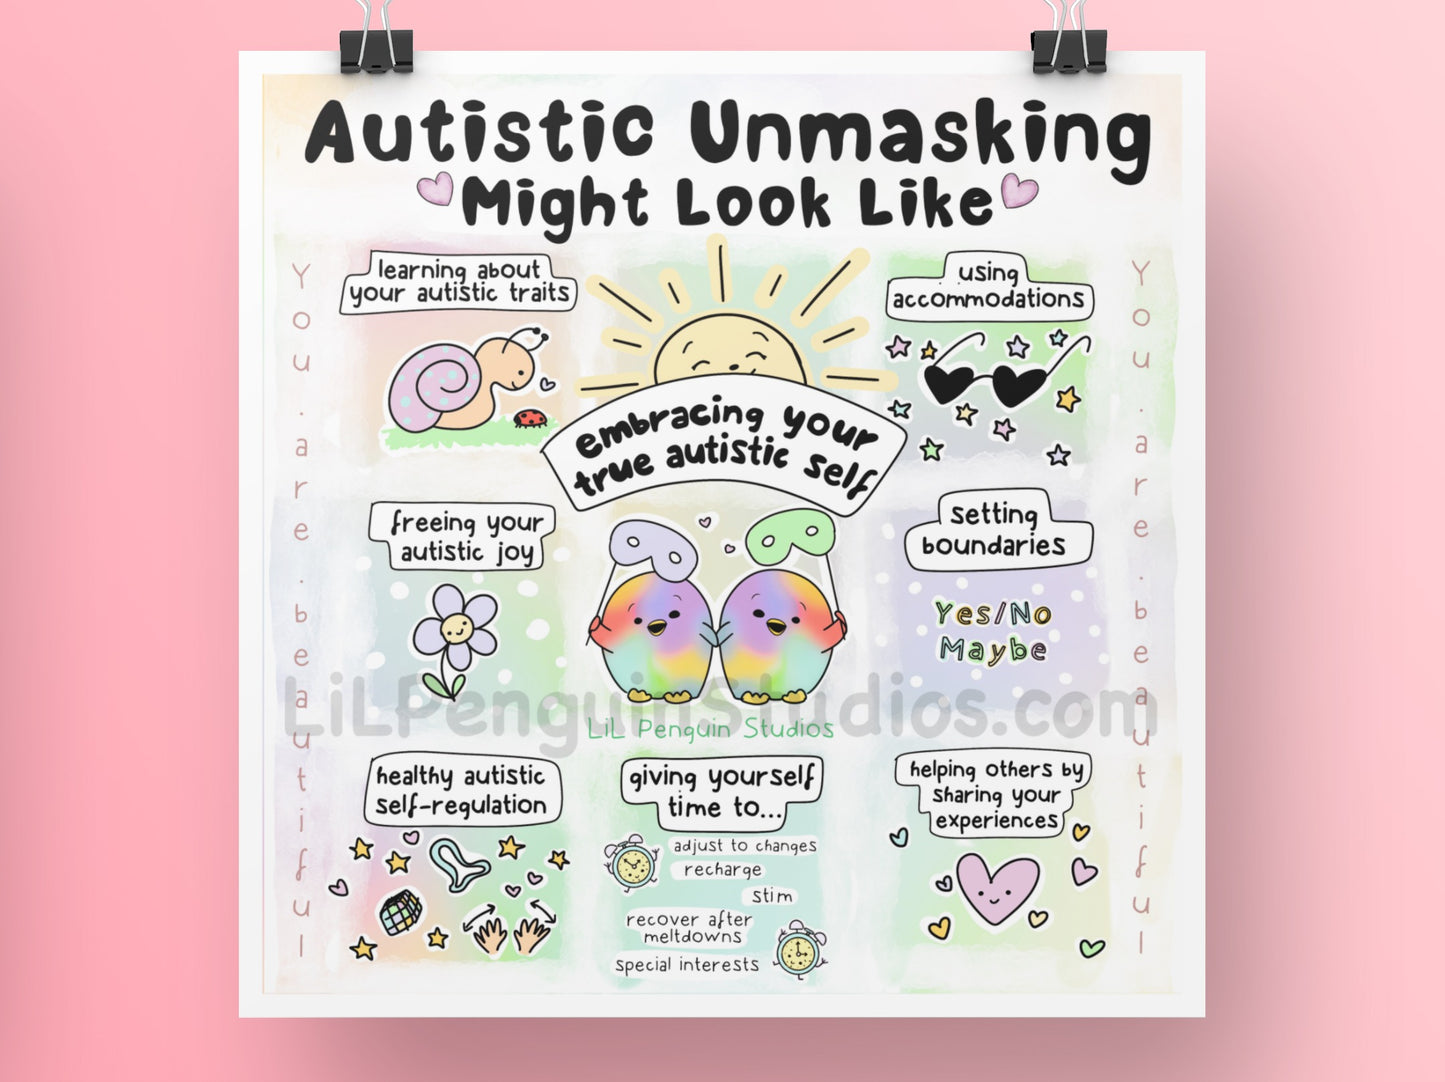 Autistic Unmasking Digital Art Print about embracing your authentic autistic self. With private practice licence.